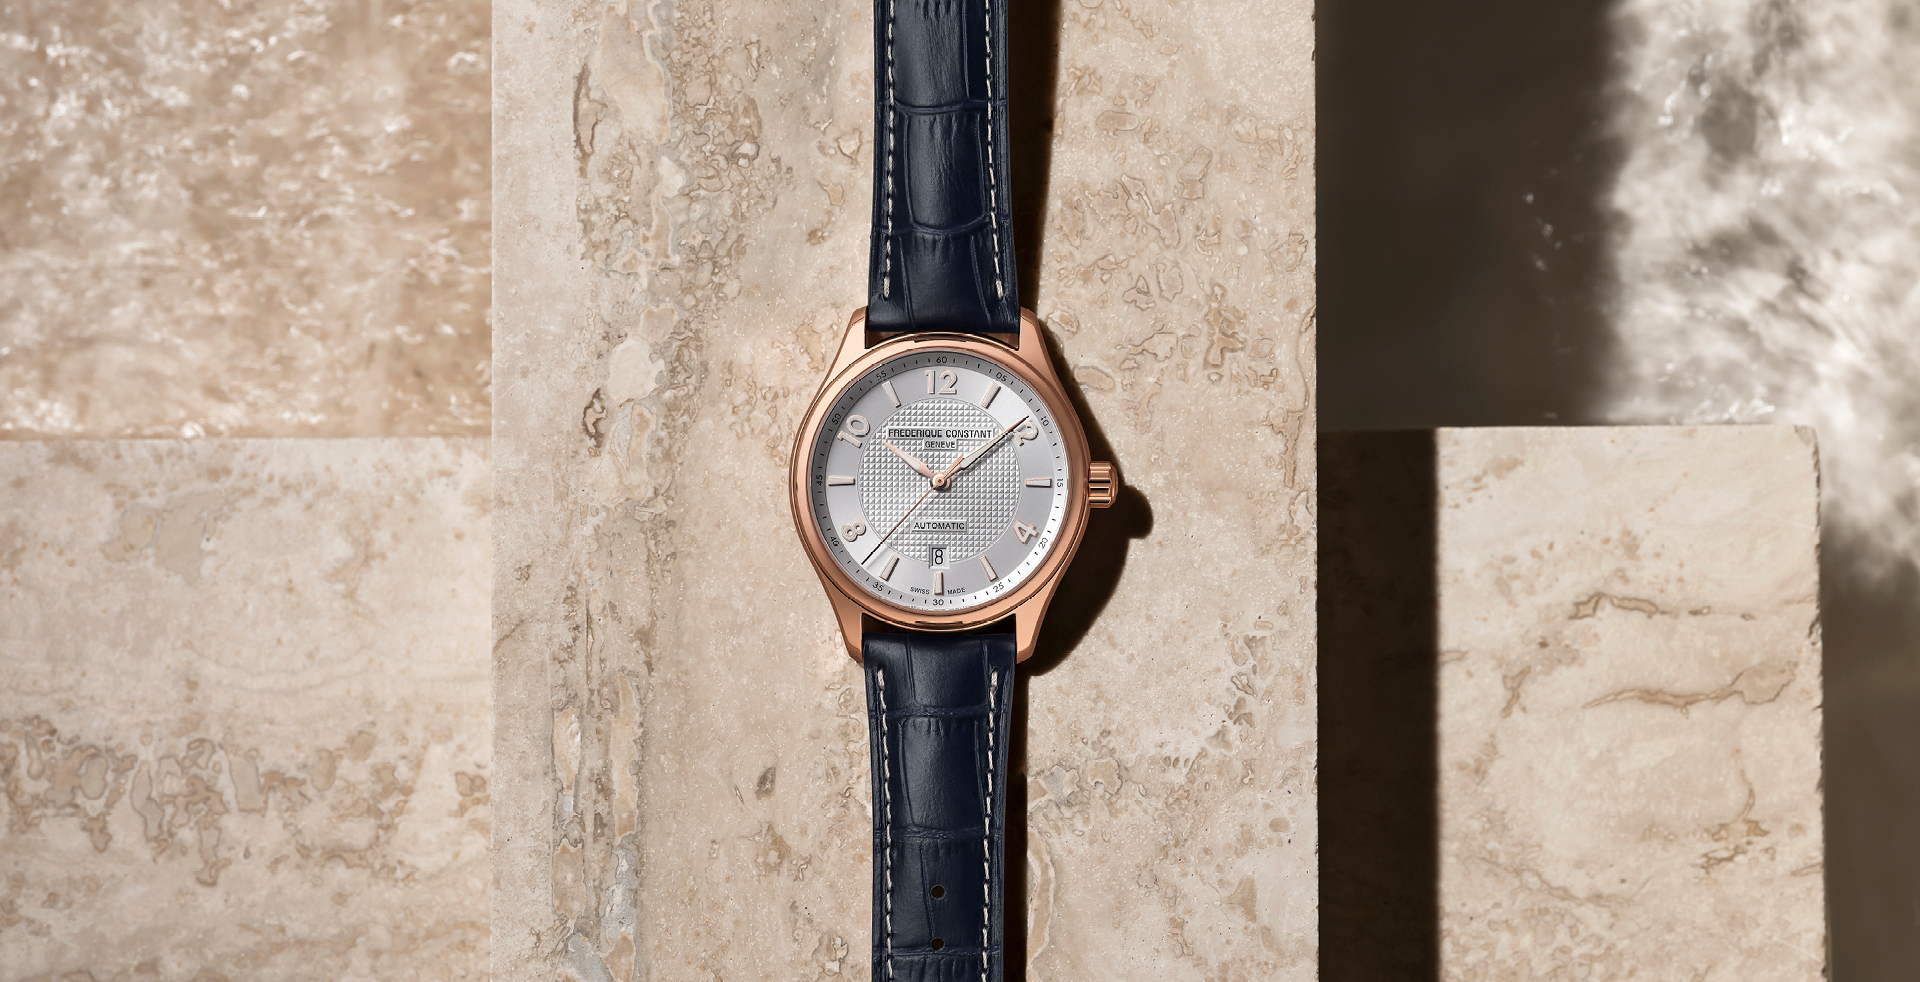 Runabout Automatic watch for man. Automatic movement, silver dial with clous de Paris guilloché in the center, rose-gold plated case and blue leather strap 